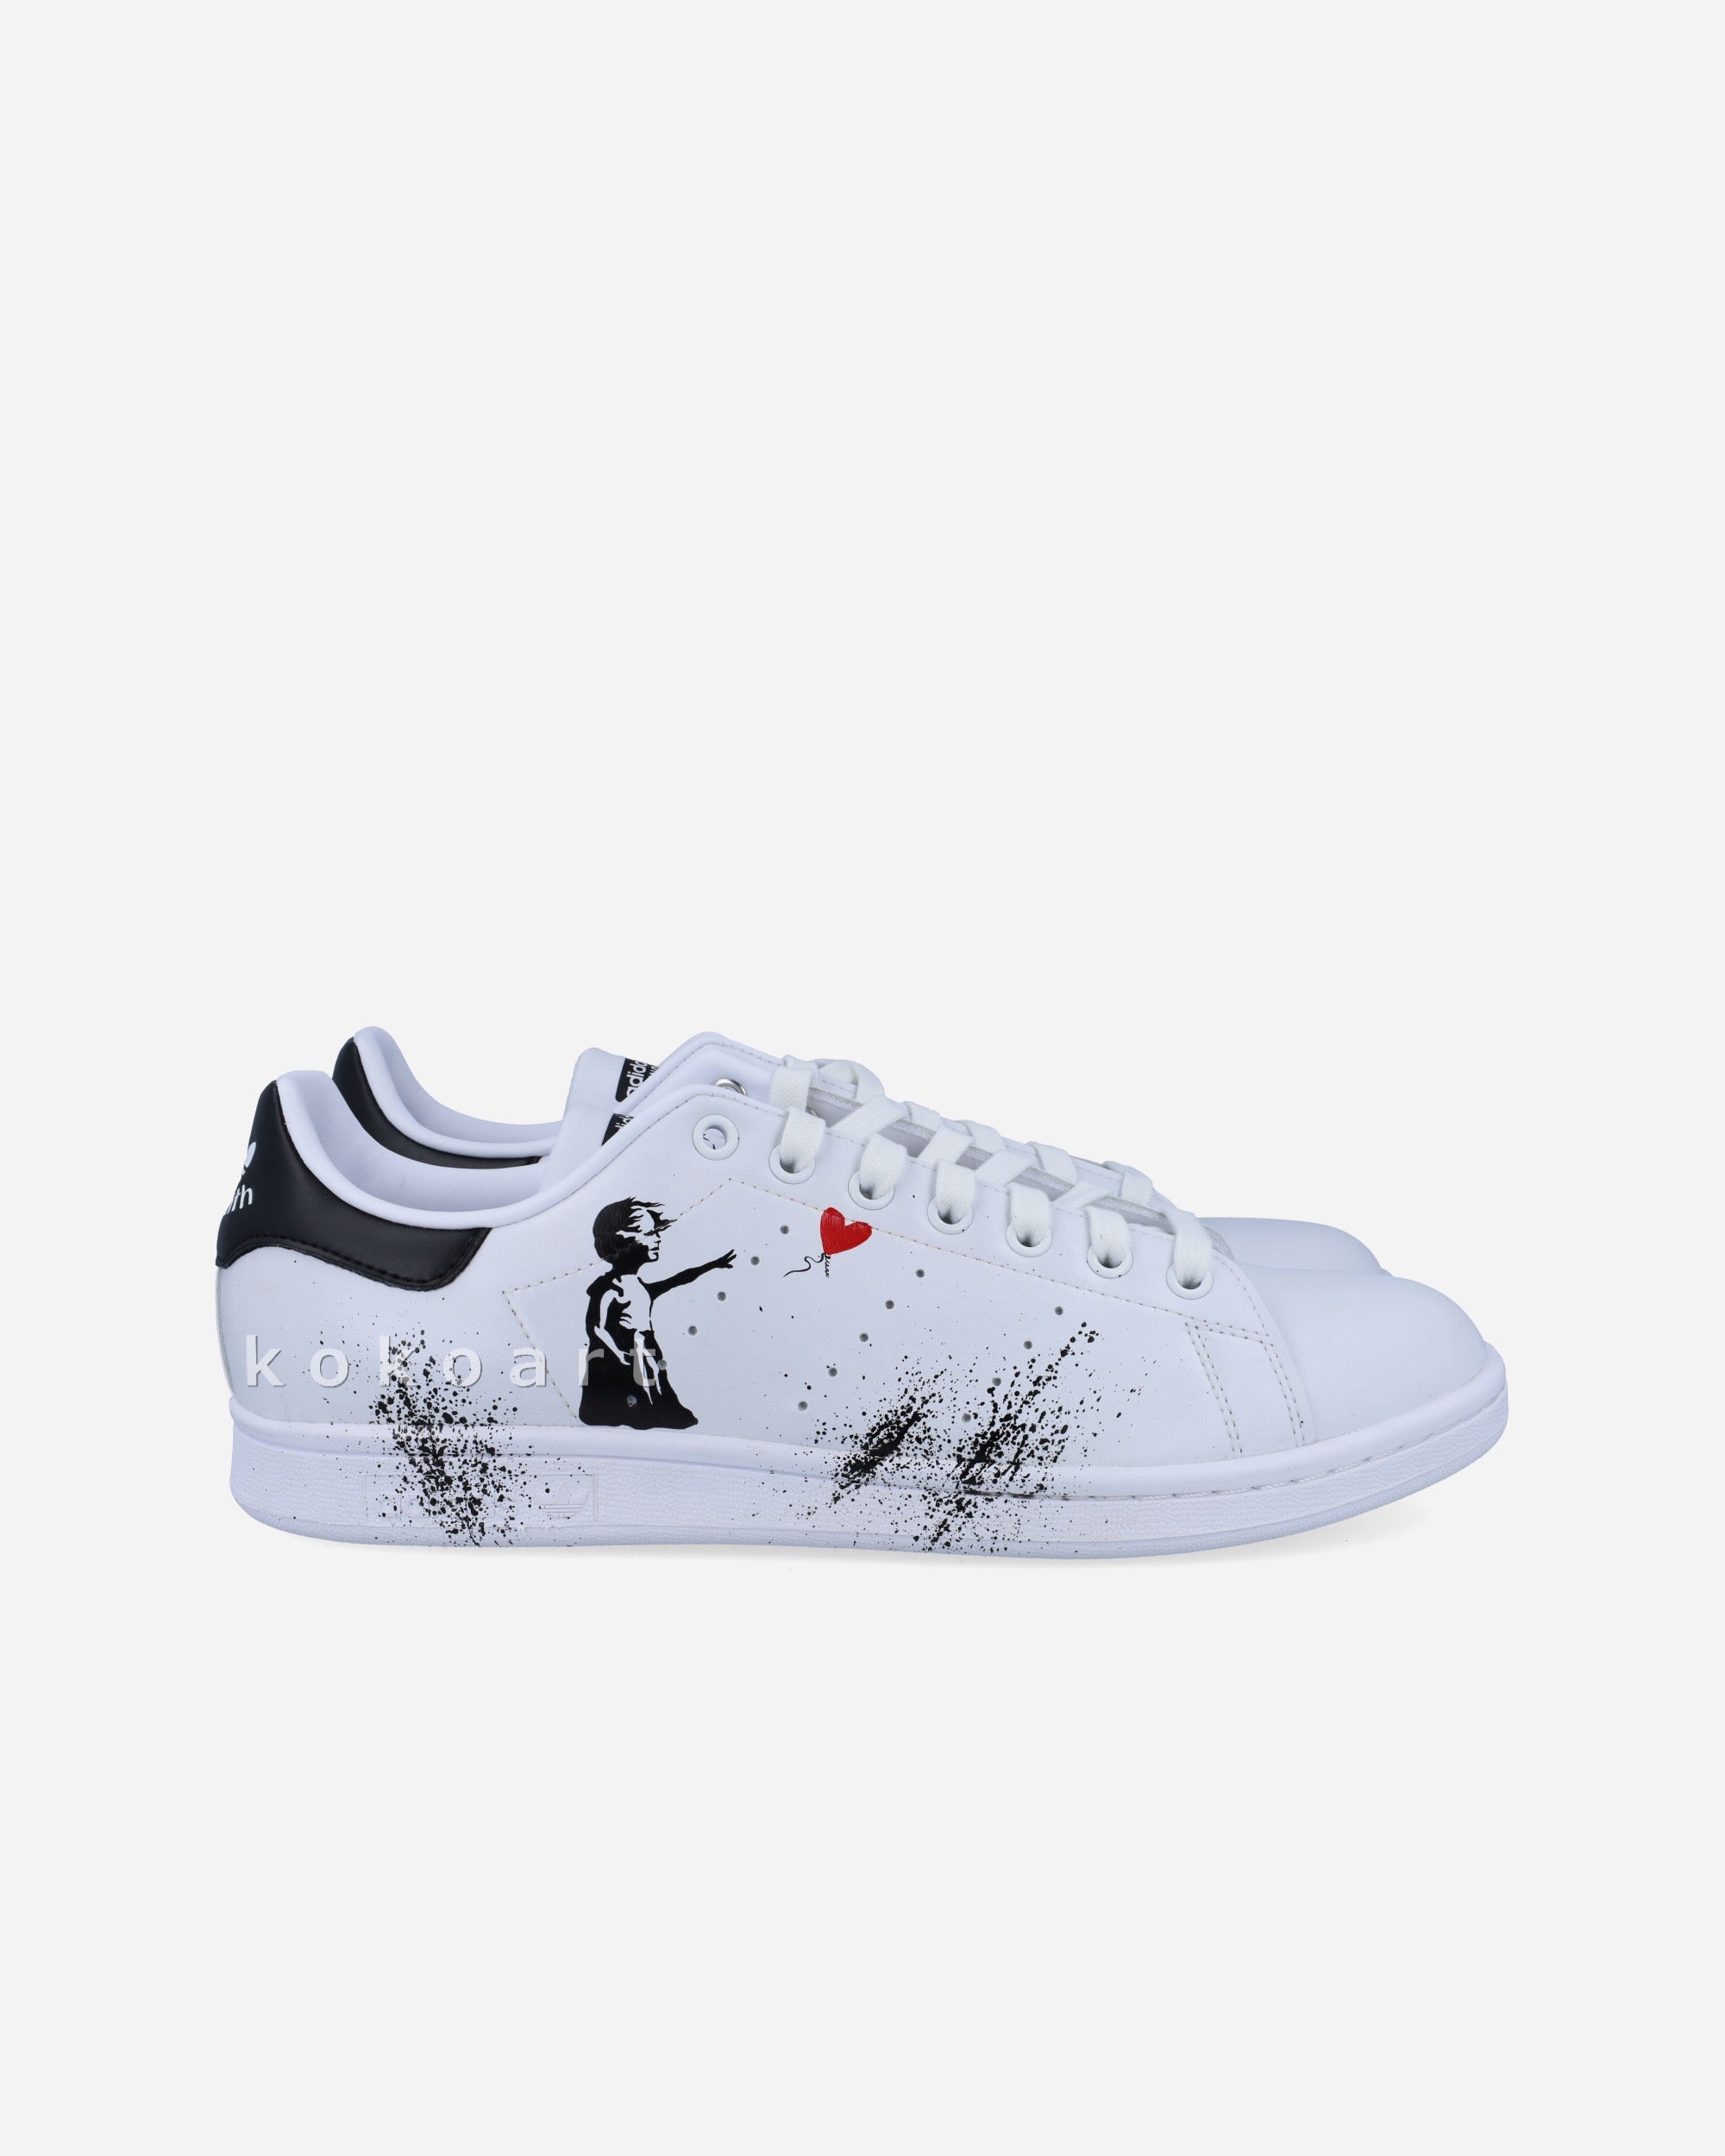 Stan Smith Hand Painted Banksy